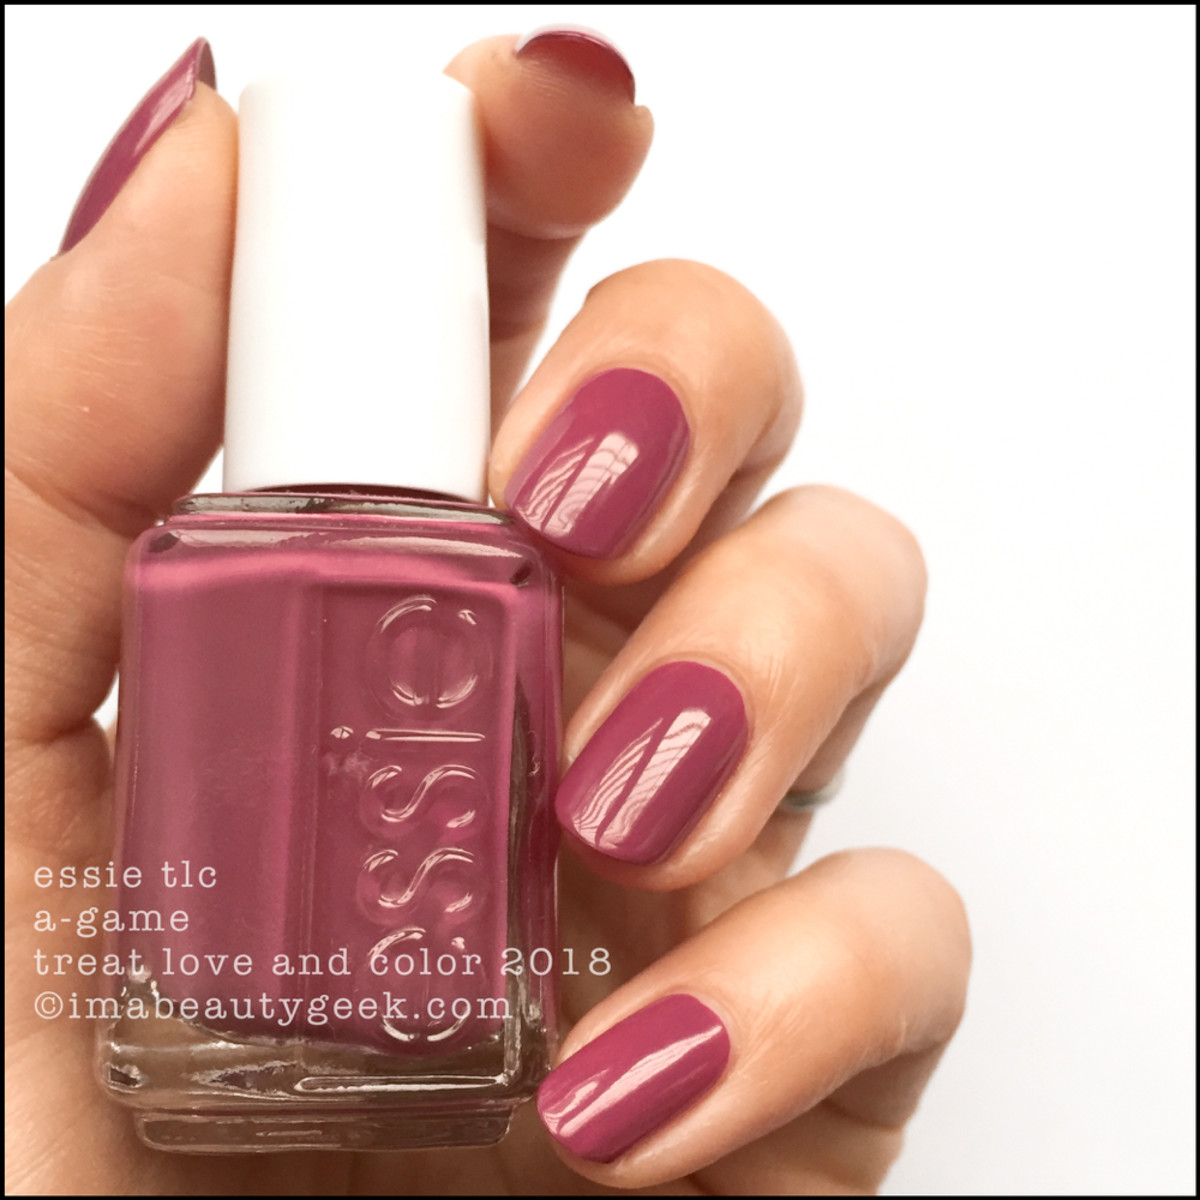 Essie TLC A-Game _ Essie Treat Love Color Swatches 2018 Shade Expansion